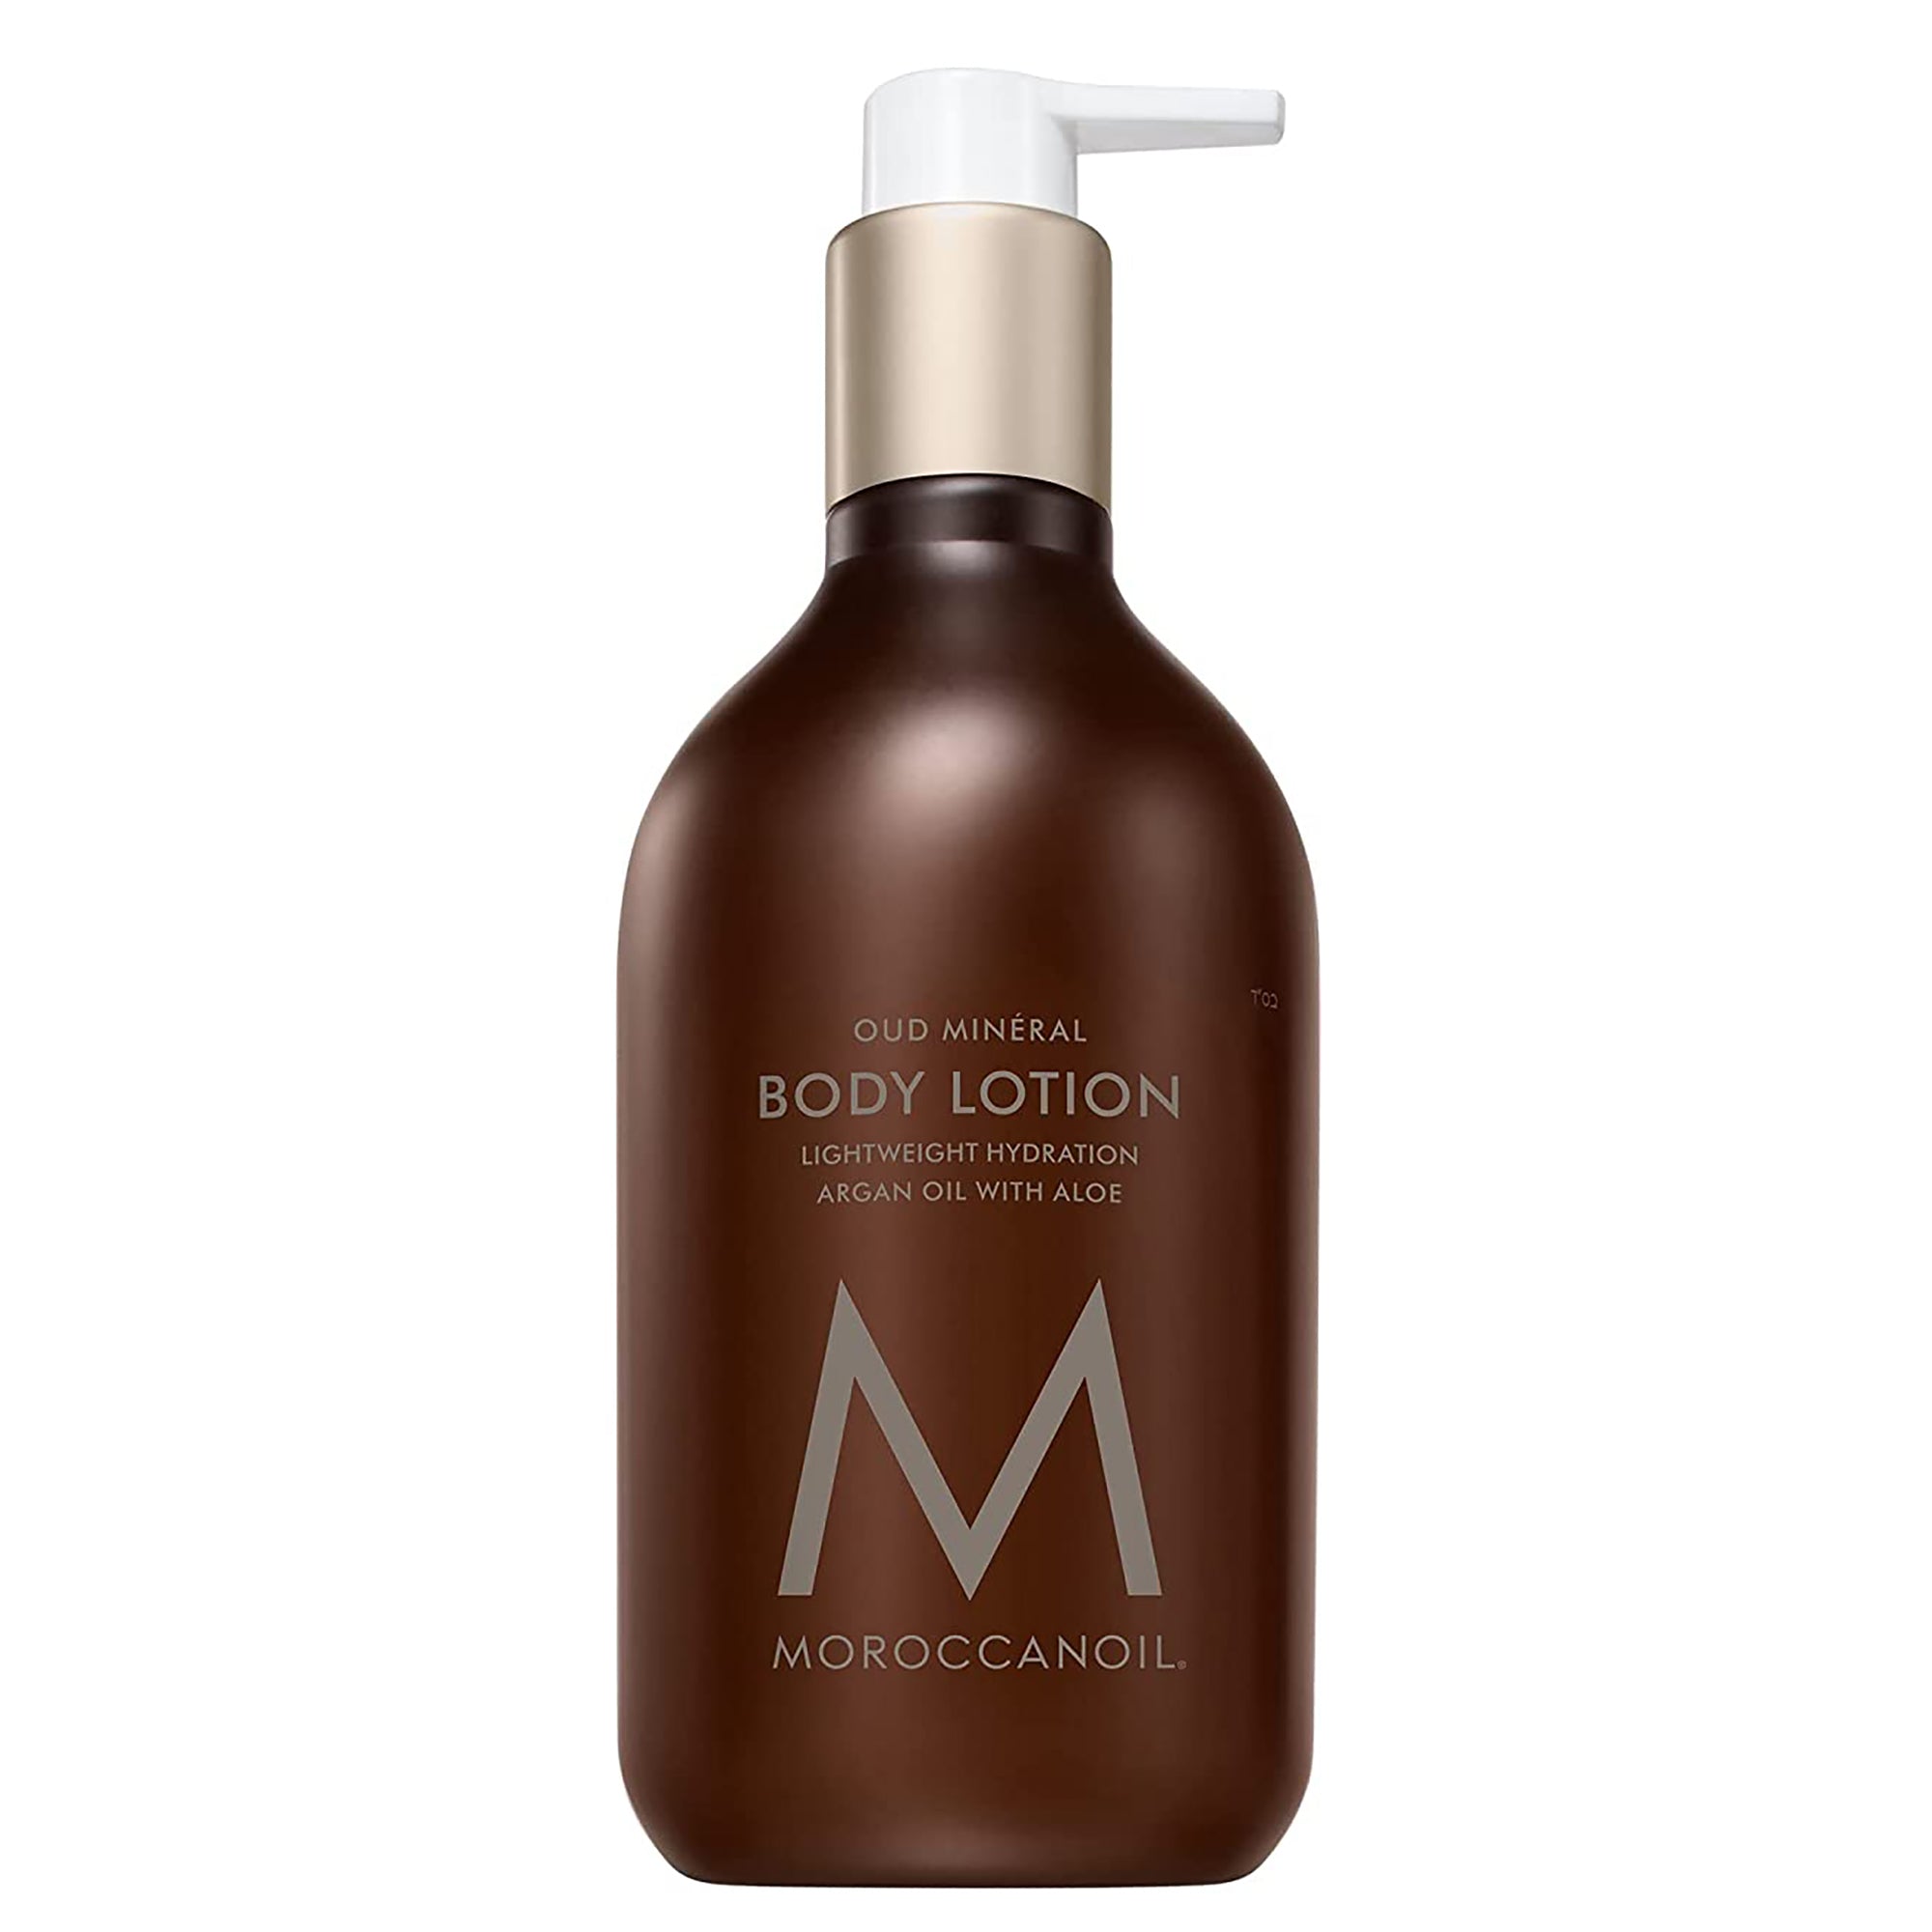 Moroccanoil Body Lotion - Oud Mineral / 12OZ